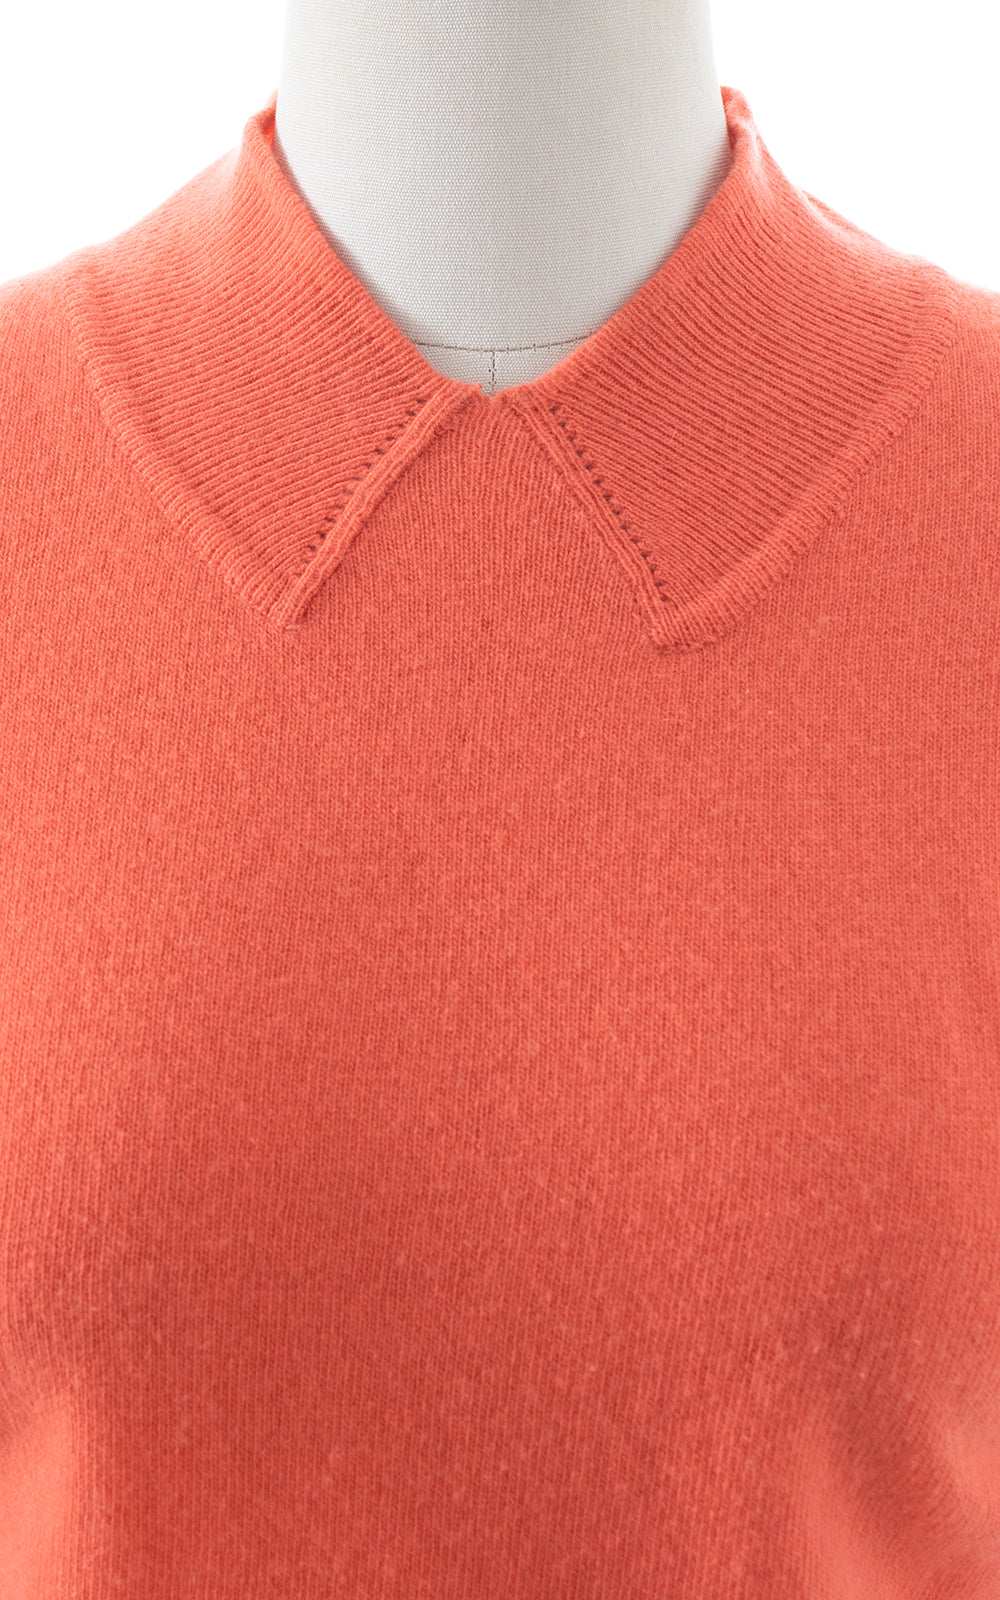 1950s Coral Cashmere Sweater Top | small/medium